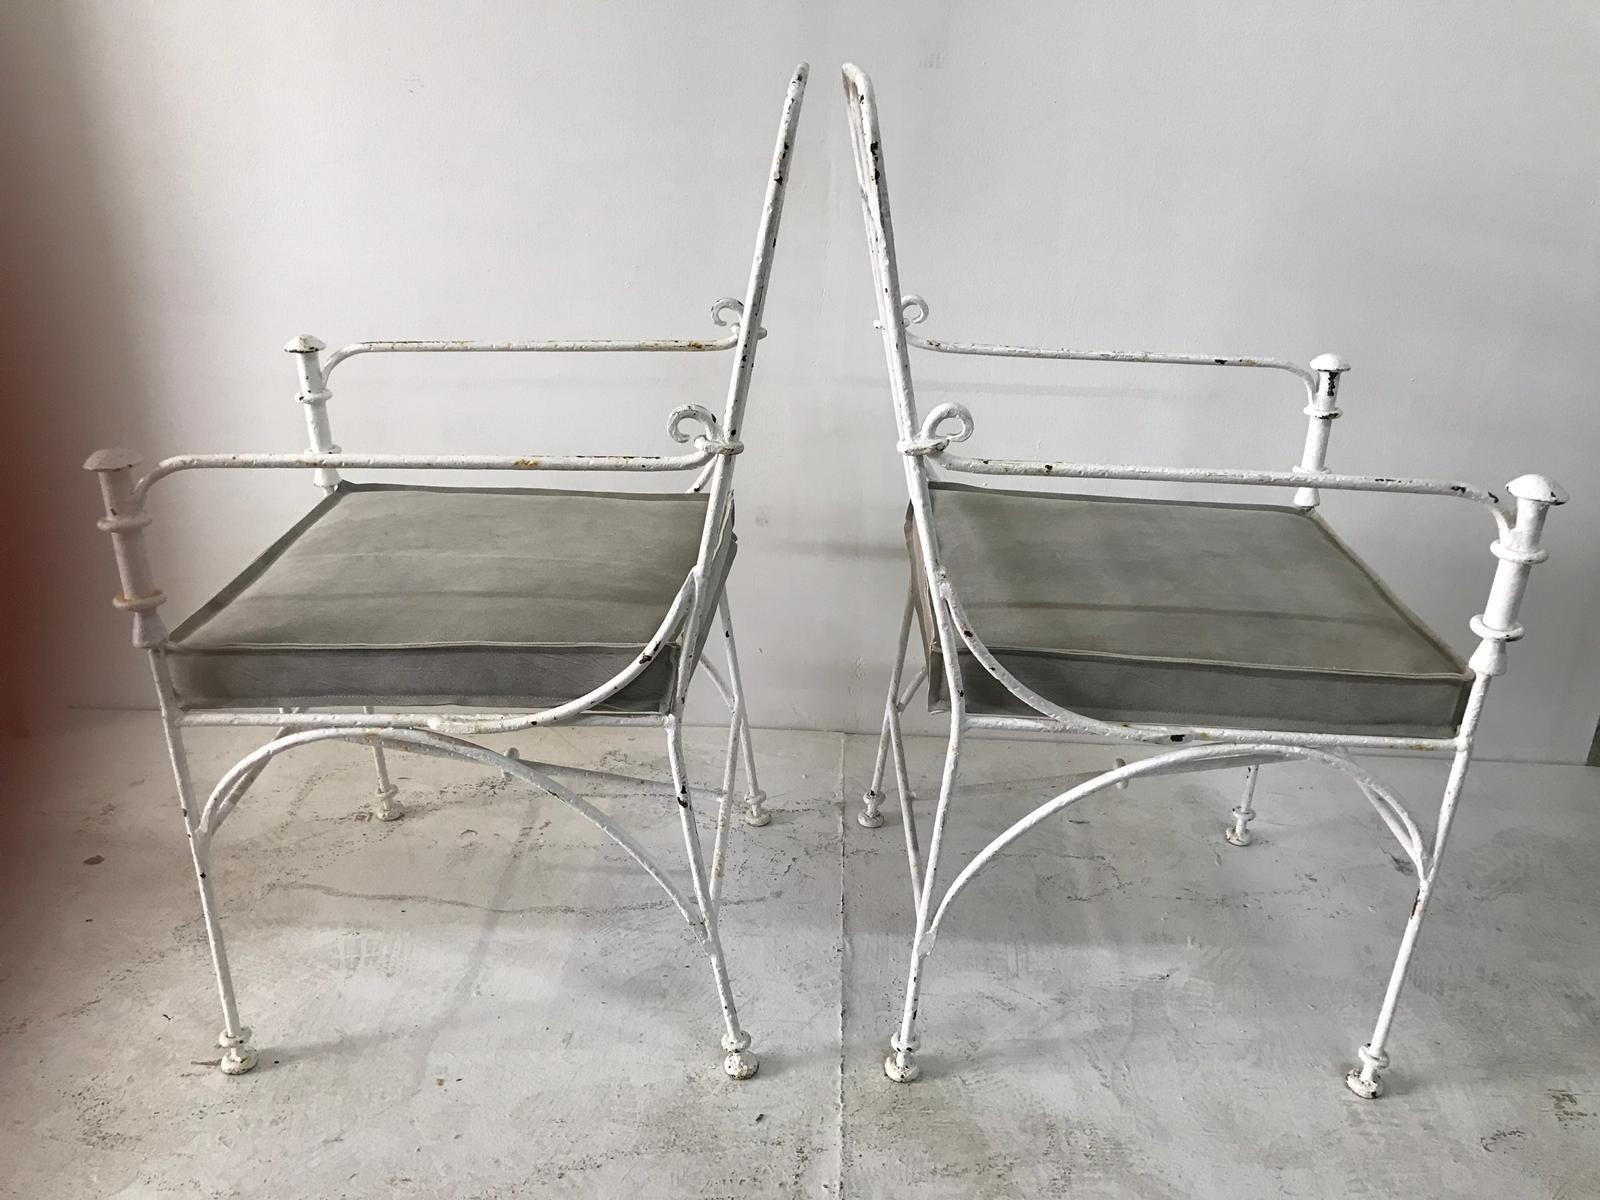 Fantastic heavy iron chairs in the style of Diego Giacometti Style, circa 1970's.
Very heavy and high quality work. with a white plastered finish, they show age and Patina, natural light gray leather cushion.